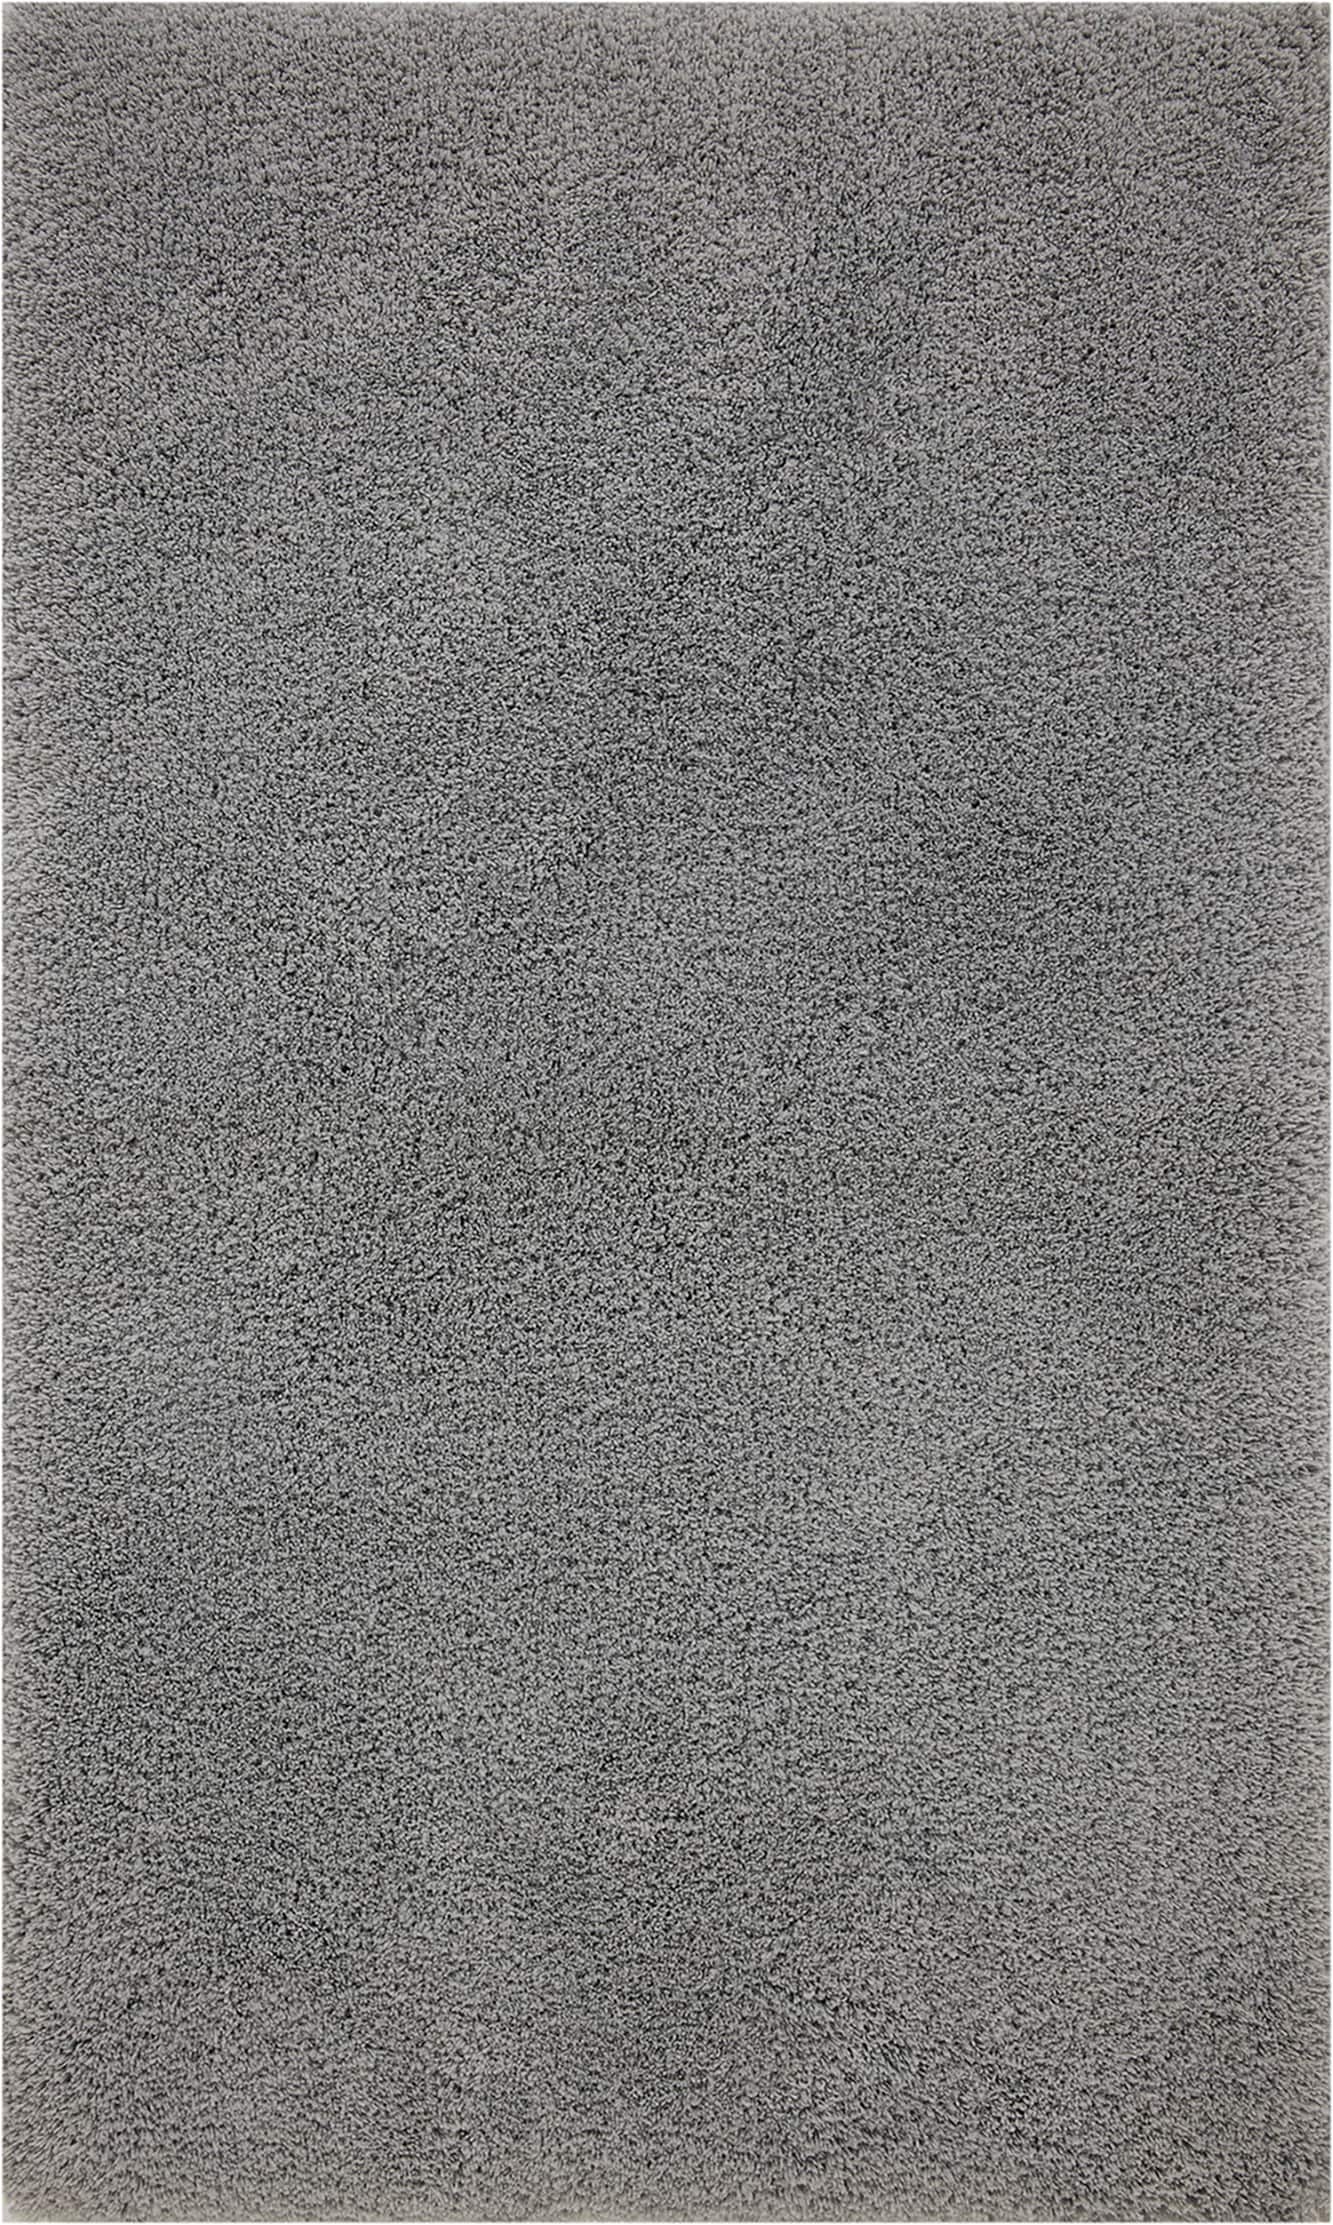 allen + roth 20-in x 34-in Light Gray Polyester Bath Rug in the Bathroom  Rugs & Mats department at